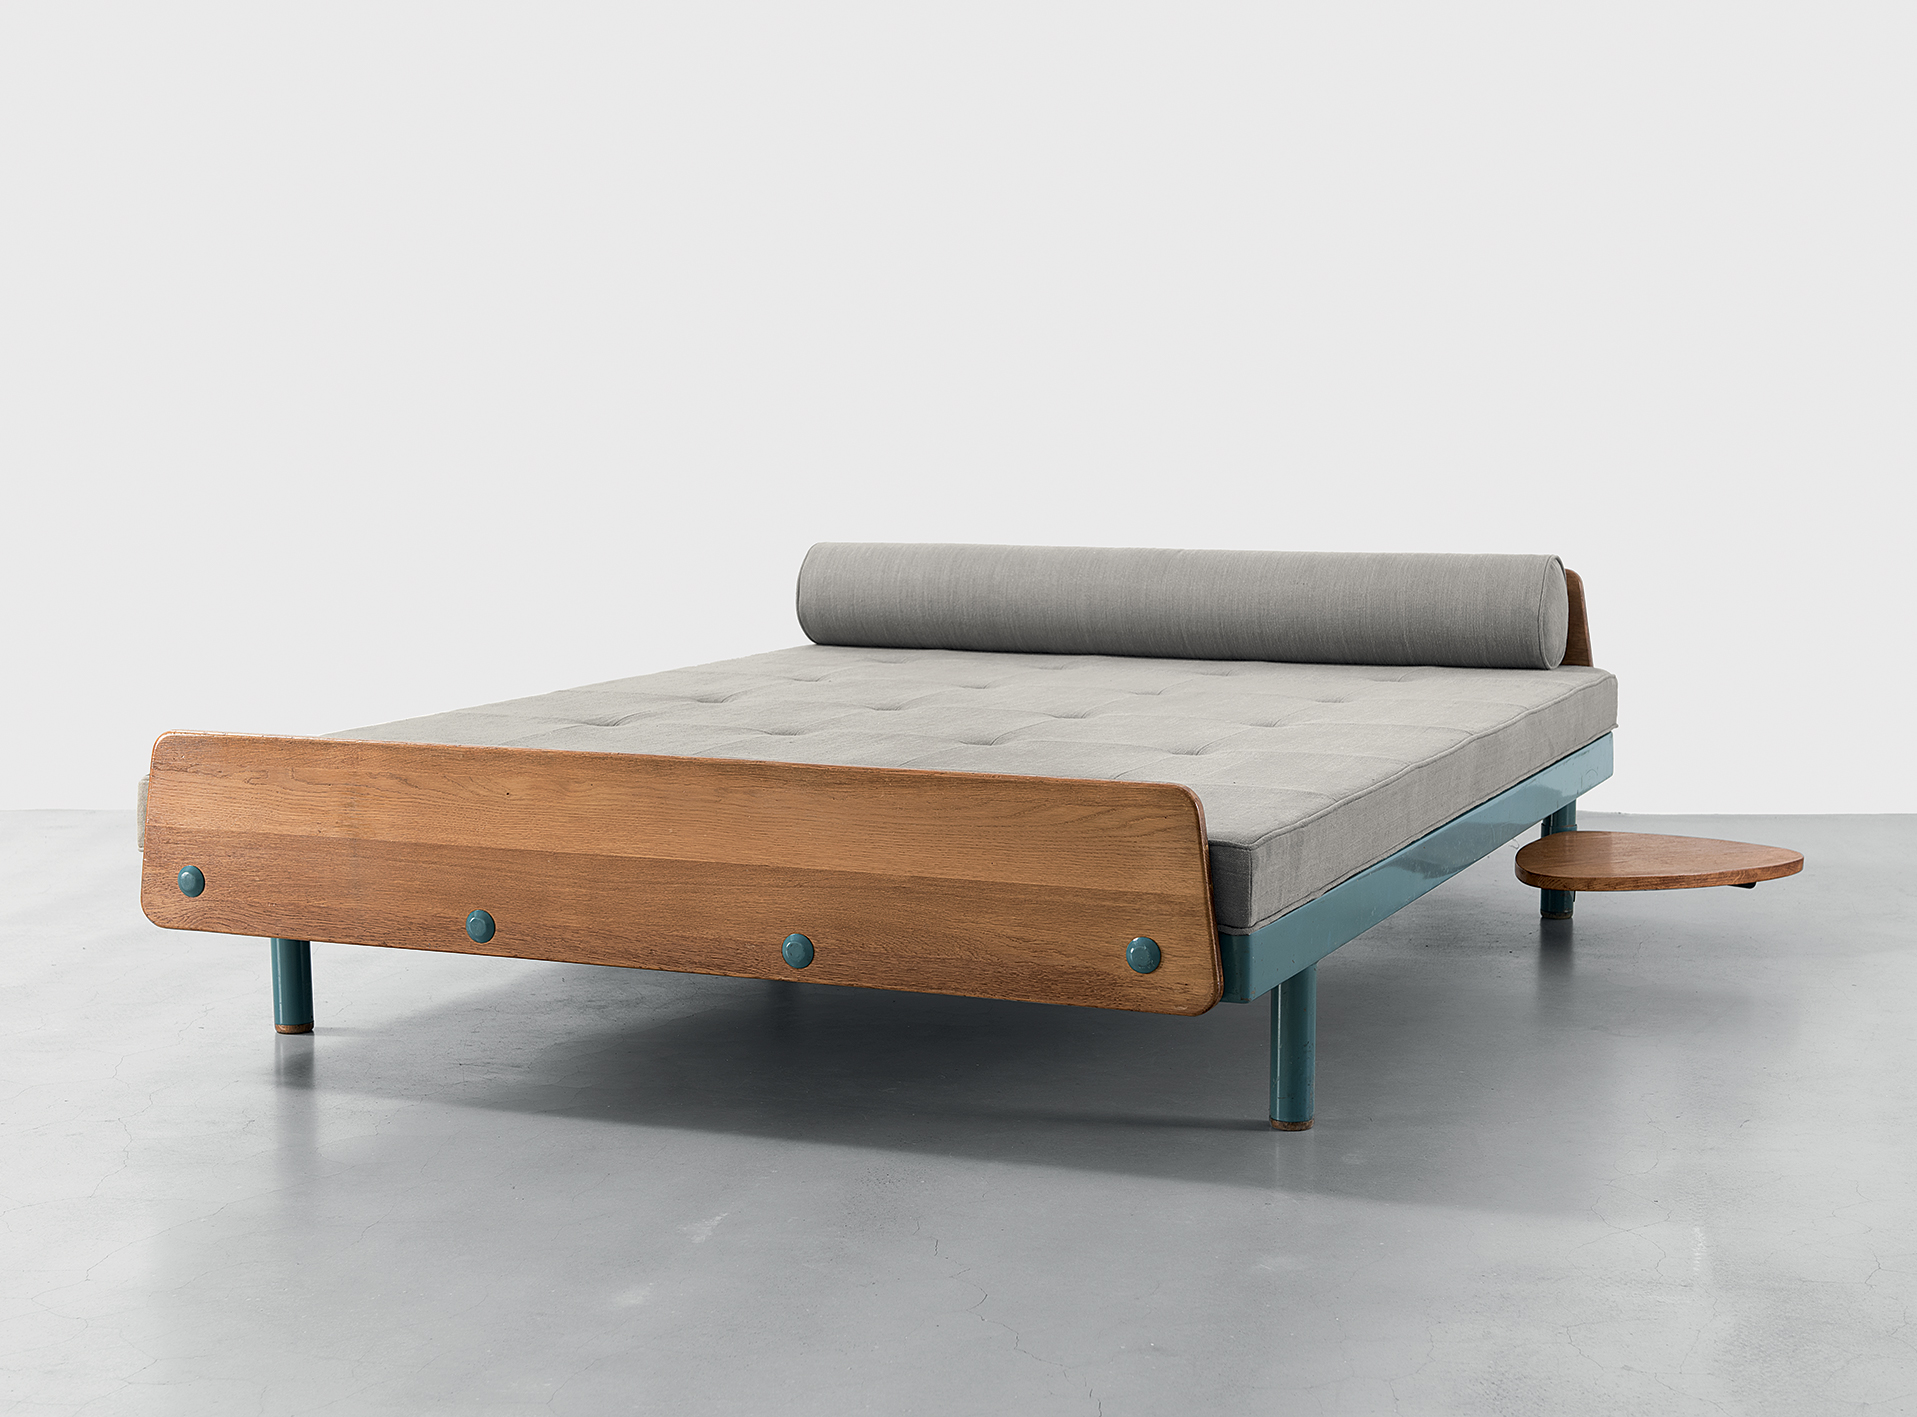 SCAL no. 458 bed, variant with swiveling tablet by Charlotte Perriand, 1957.